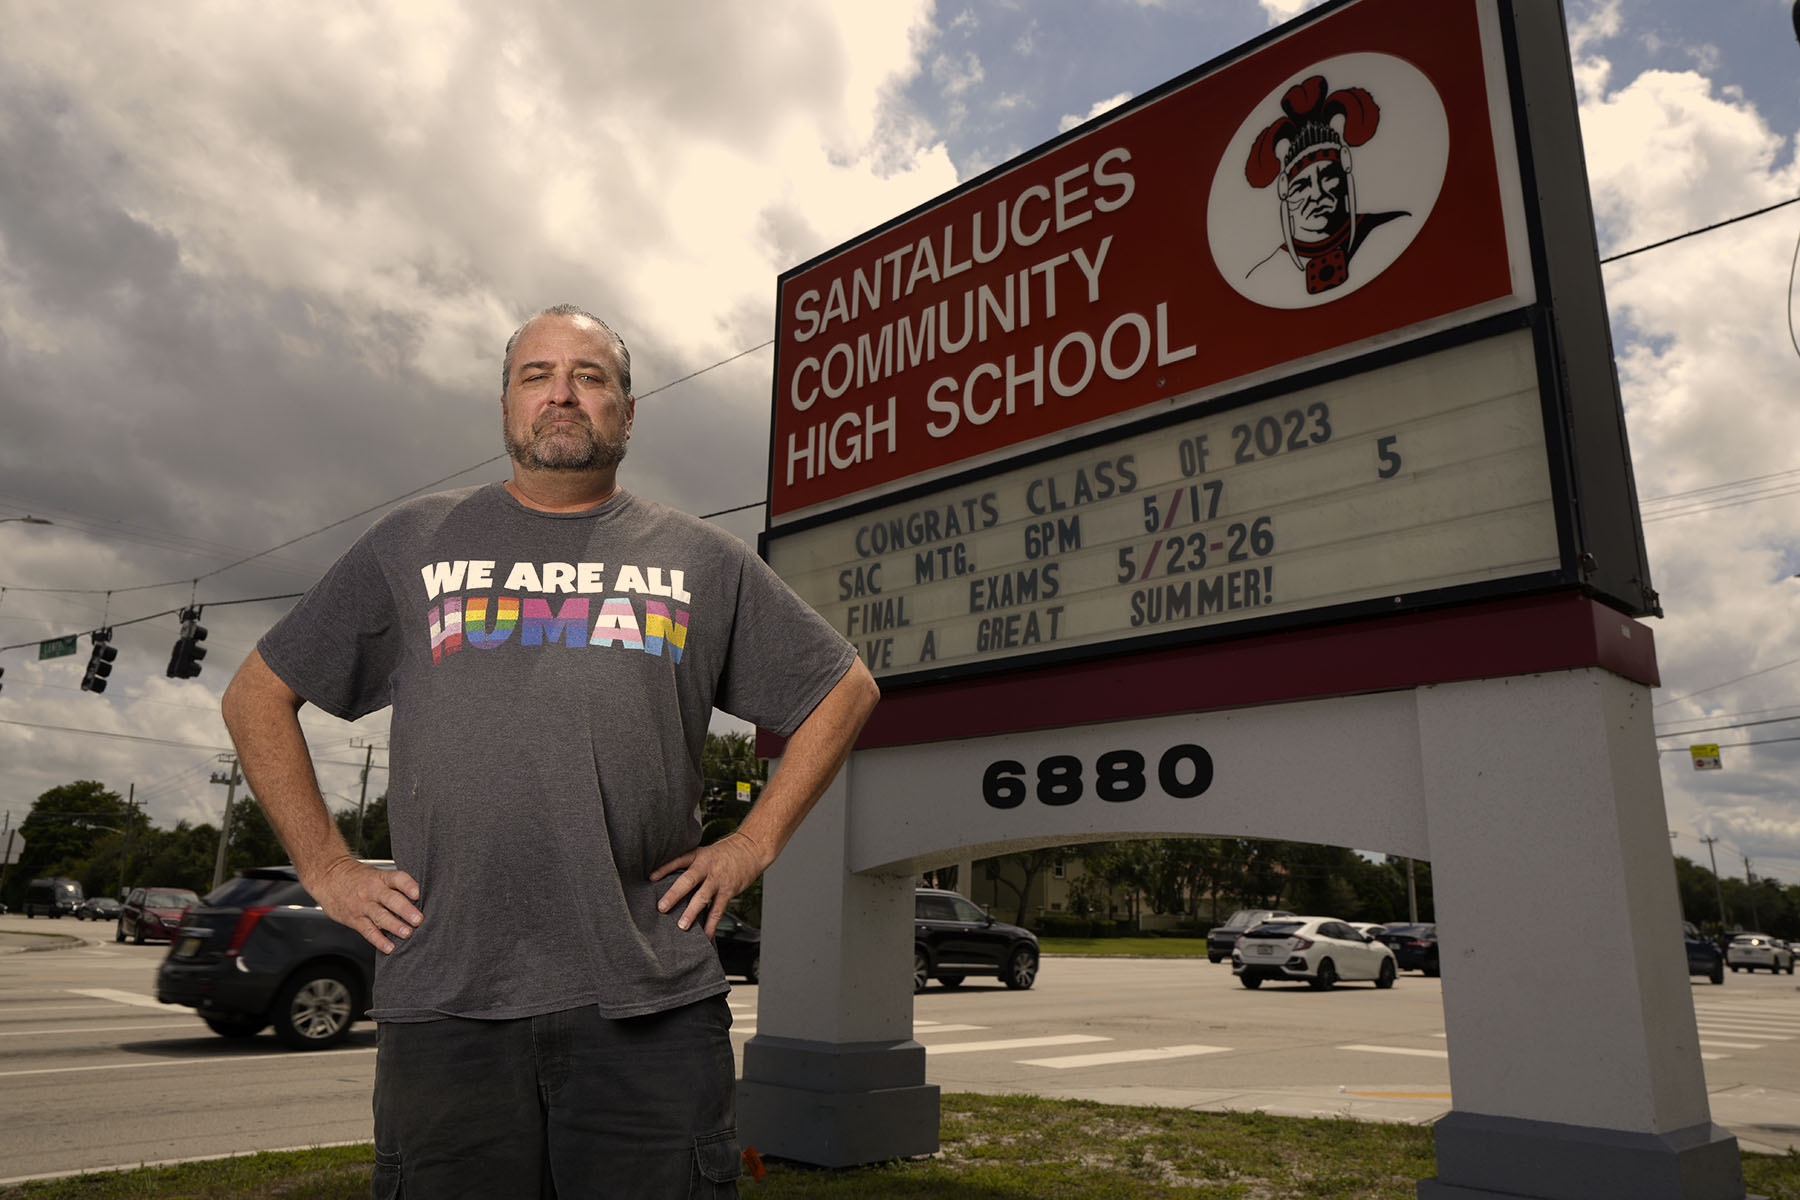 Michael Woods stands in front of his school sign in Lantana, Florida, wearing his protest shirt "We Are All Human."